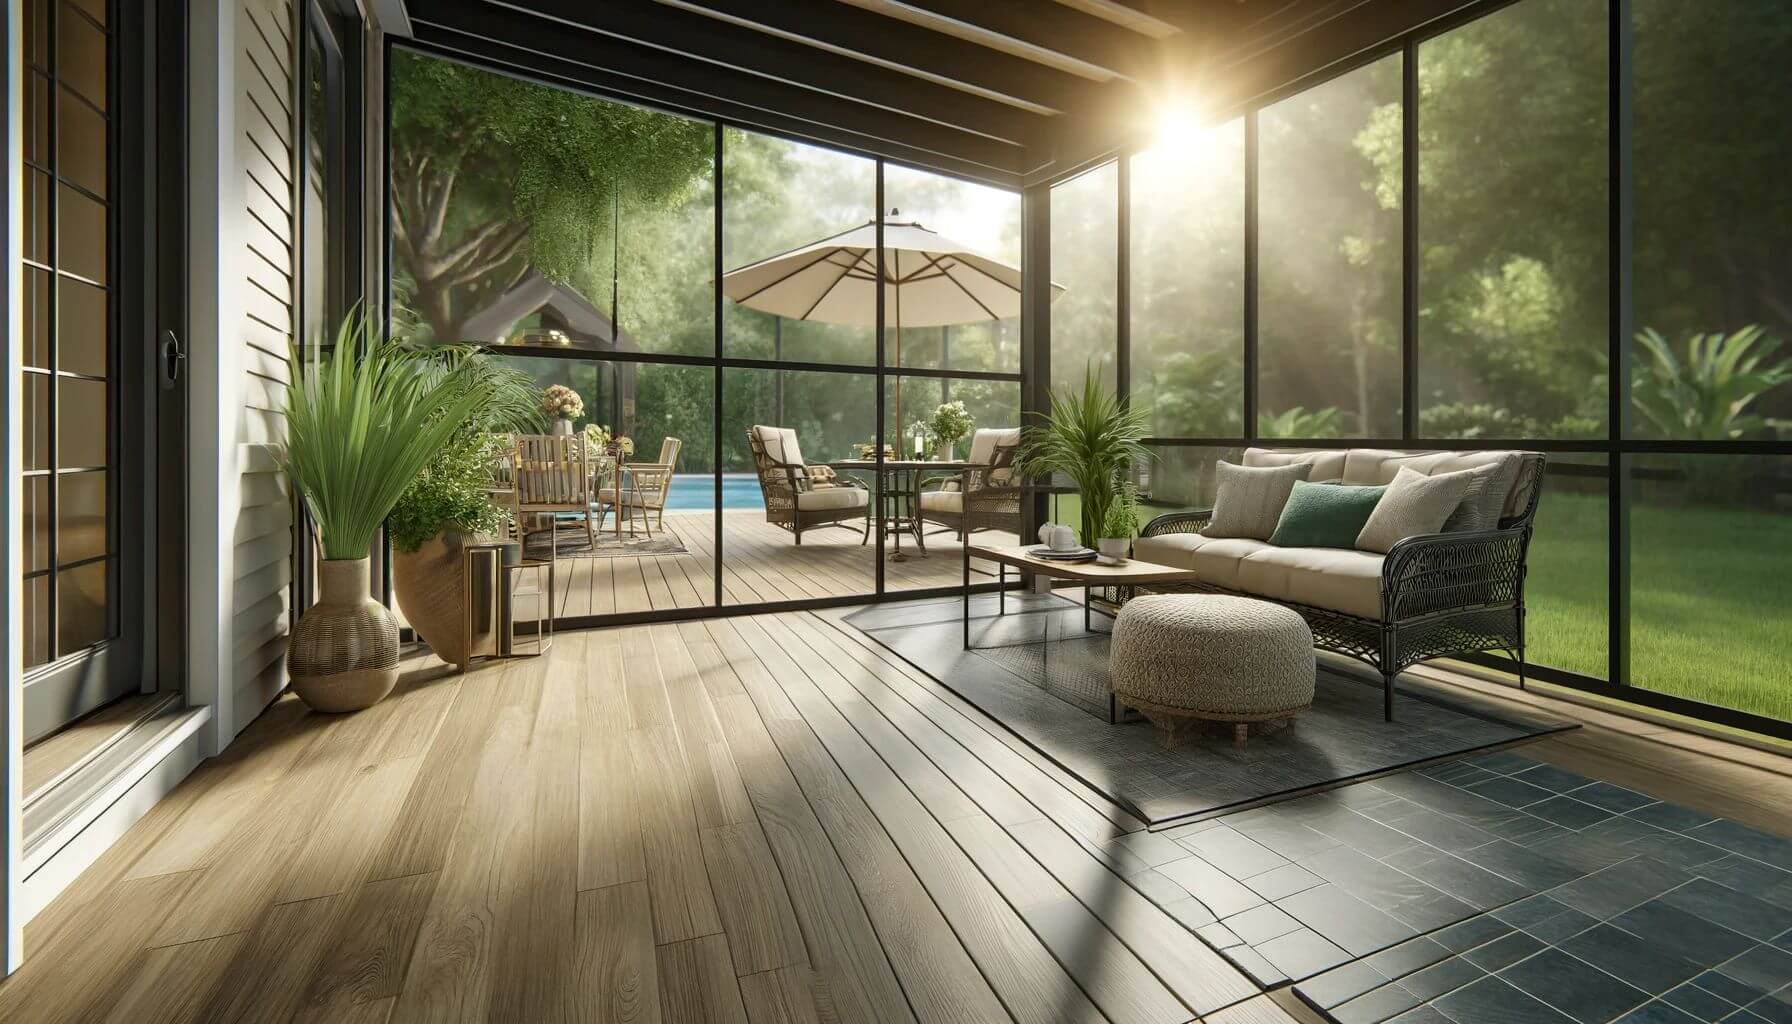 What is the Best Waterproof Flooring for a Screened-in Porch